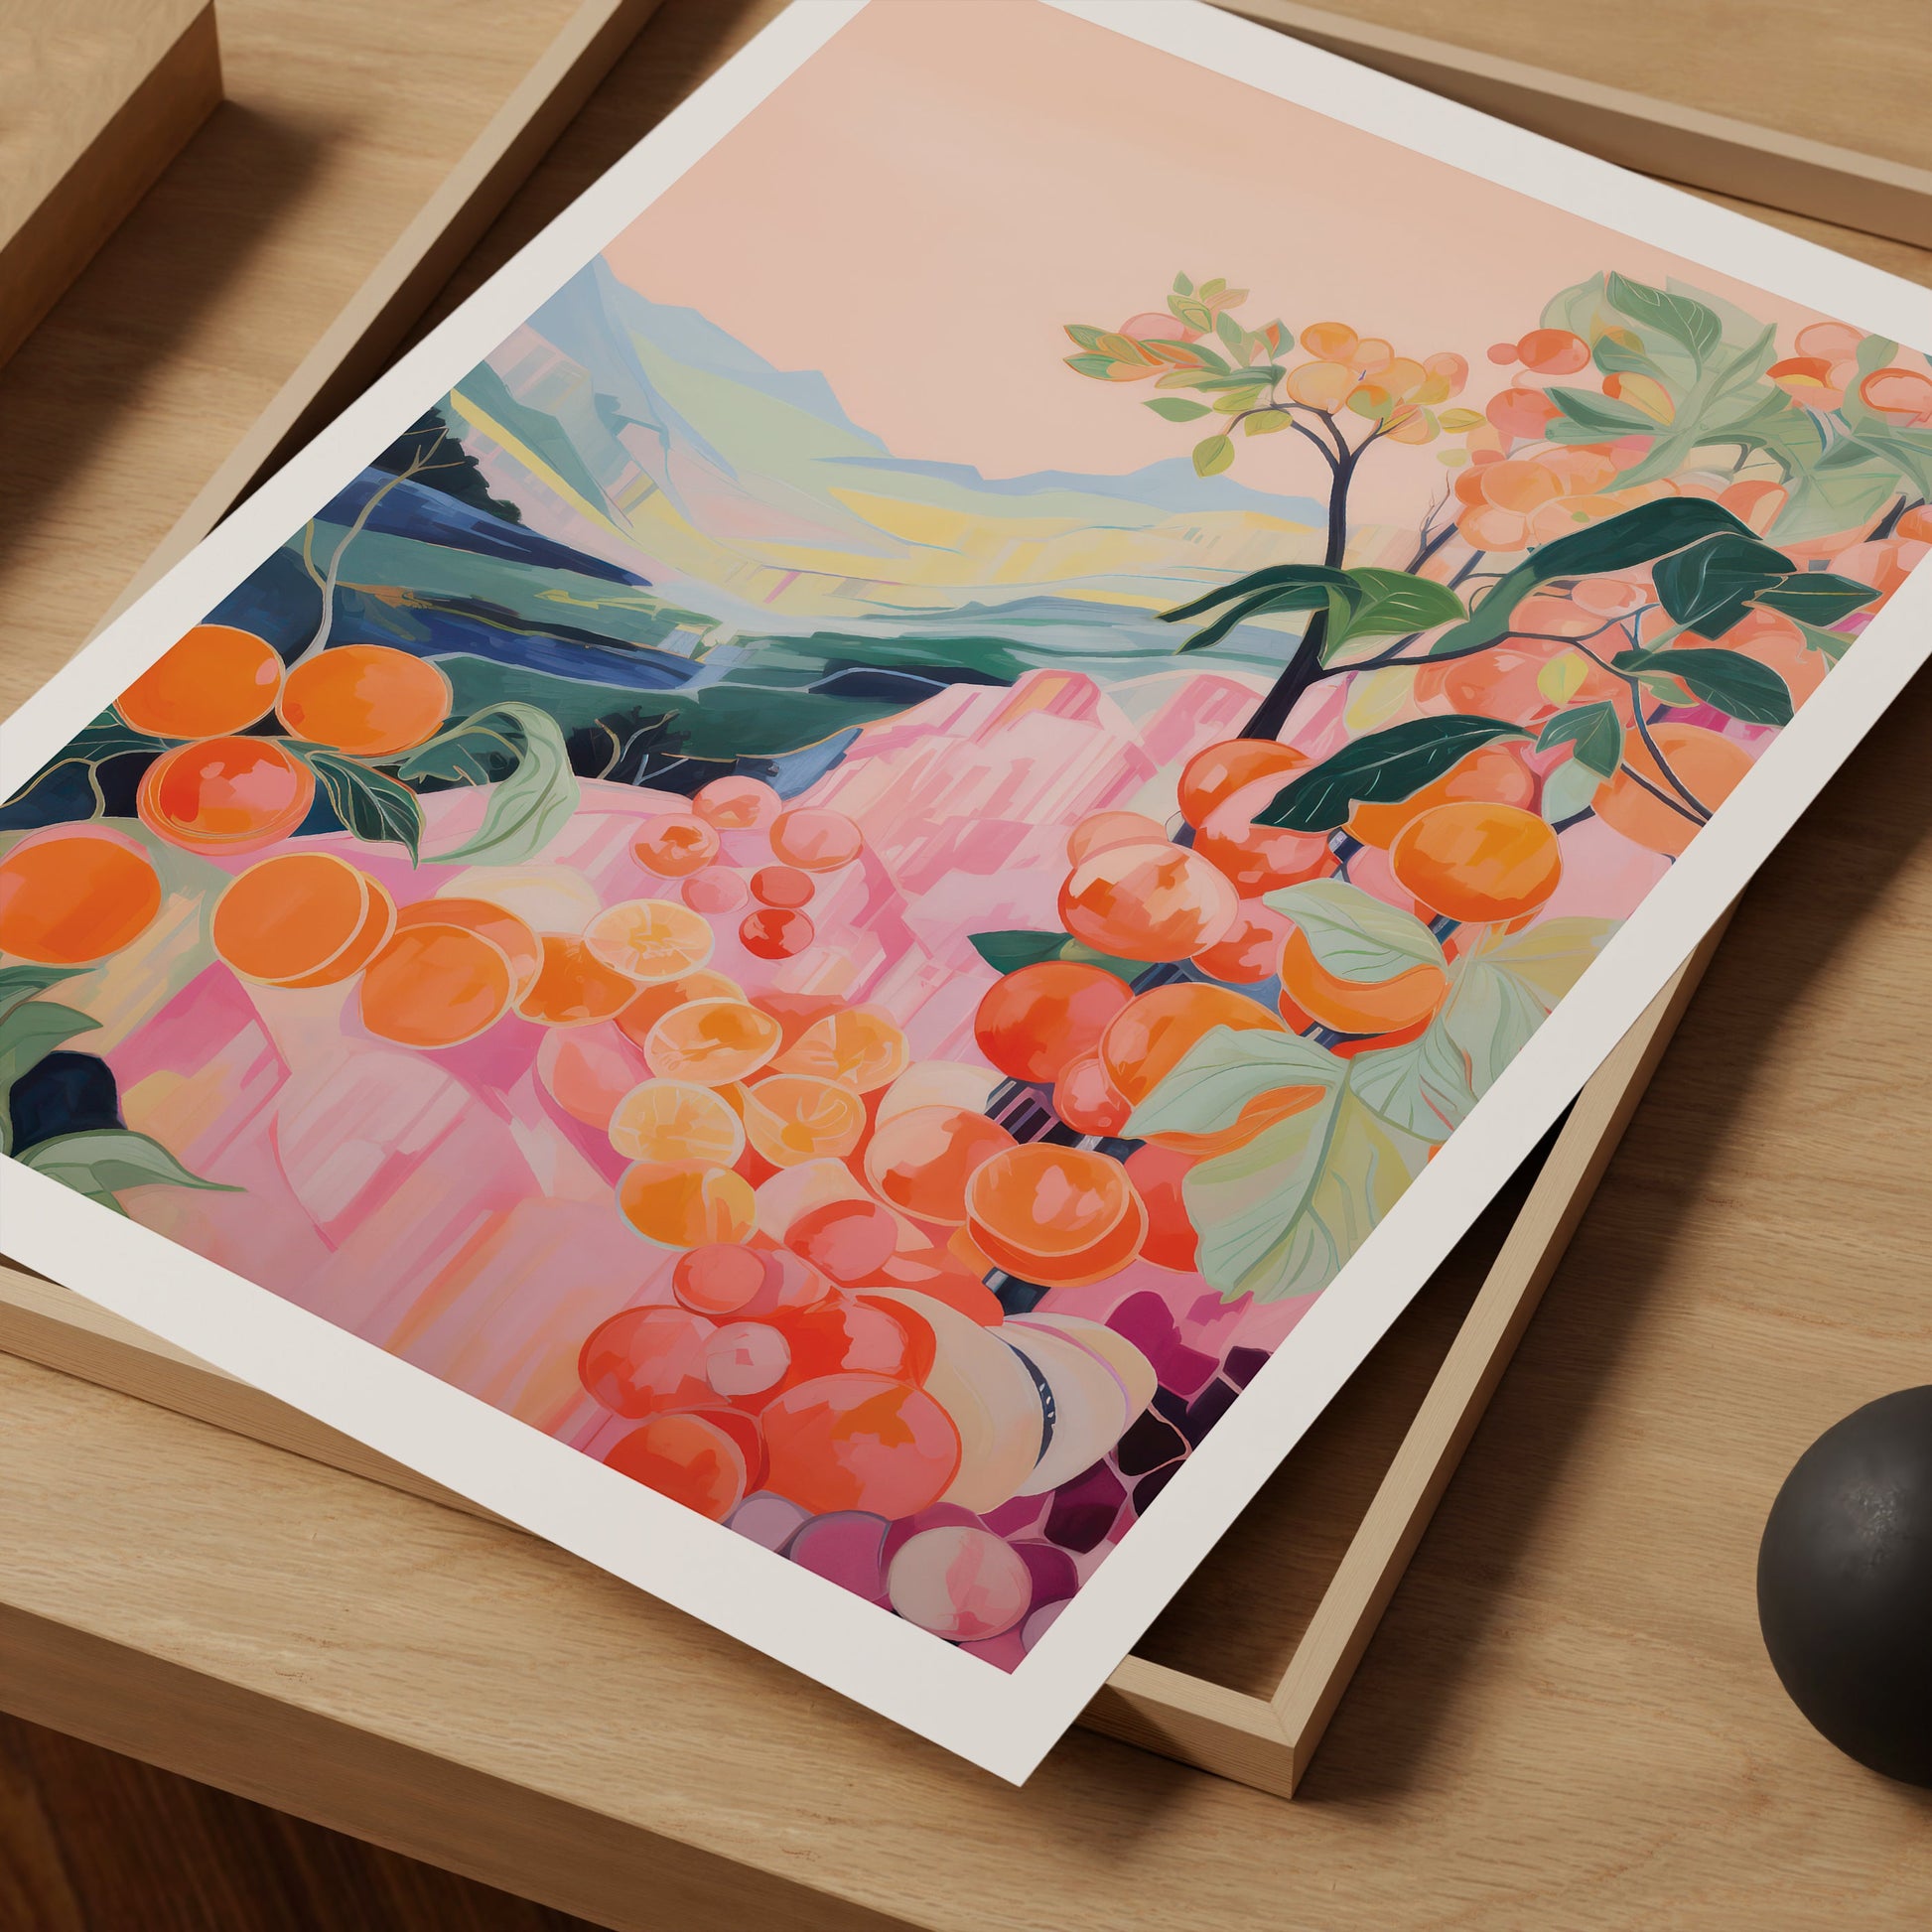 a painting of oranges on a table next to a computer mouse